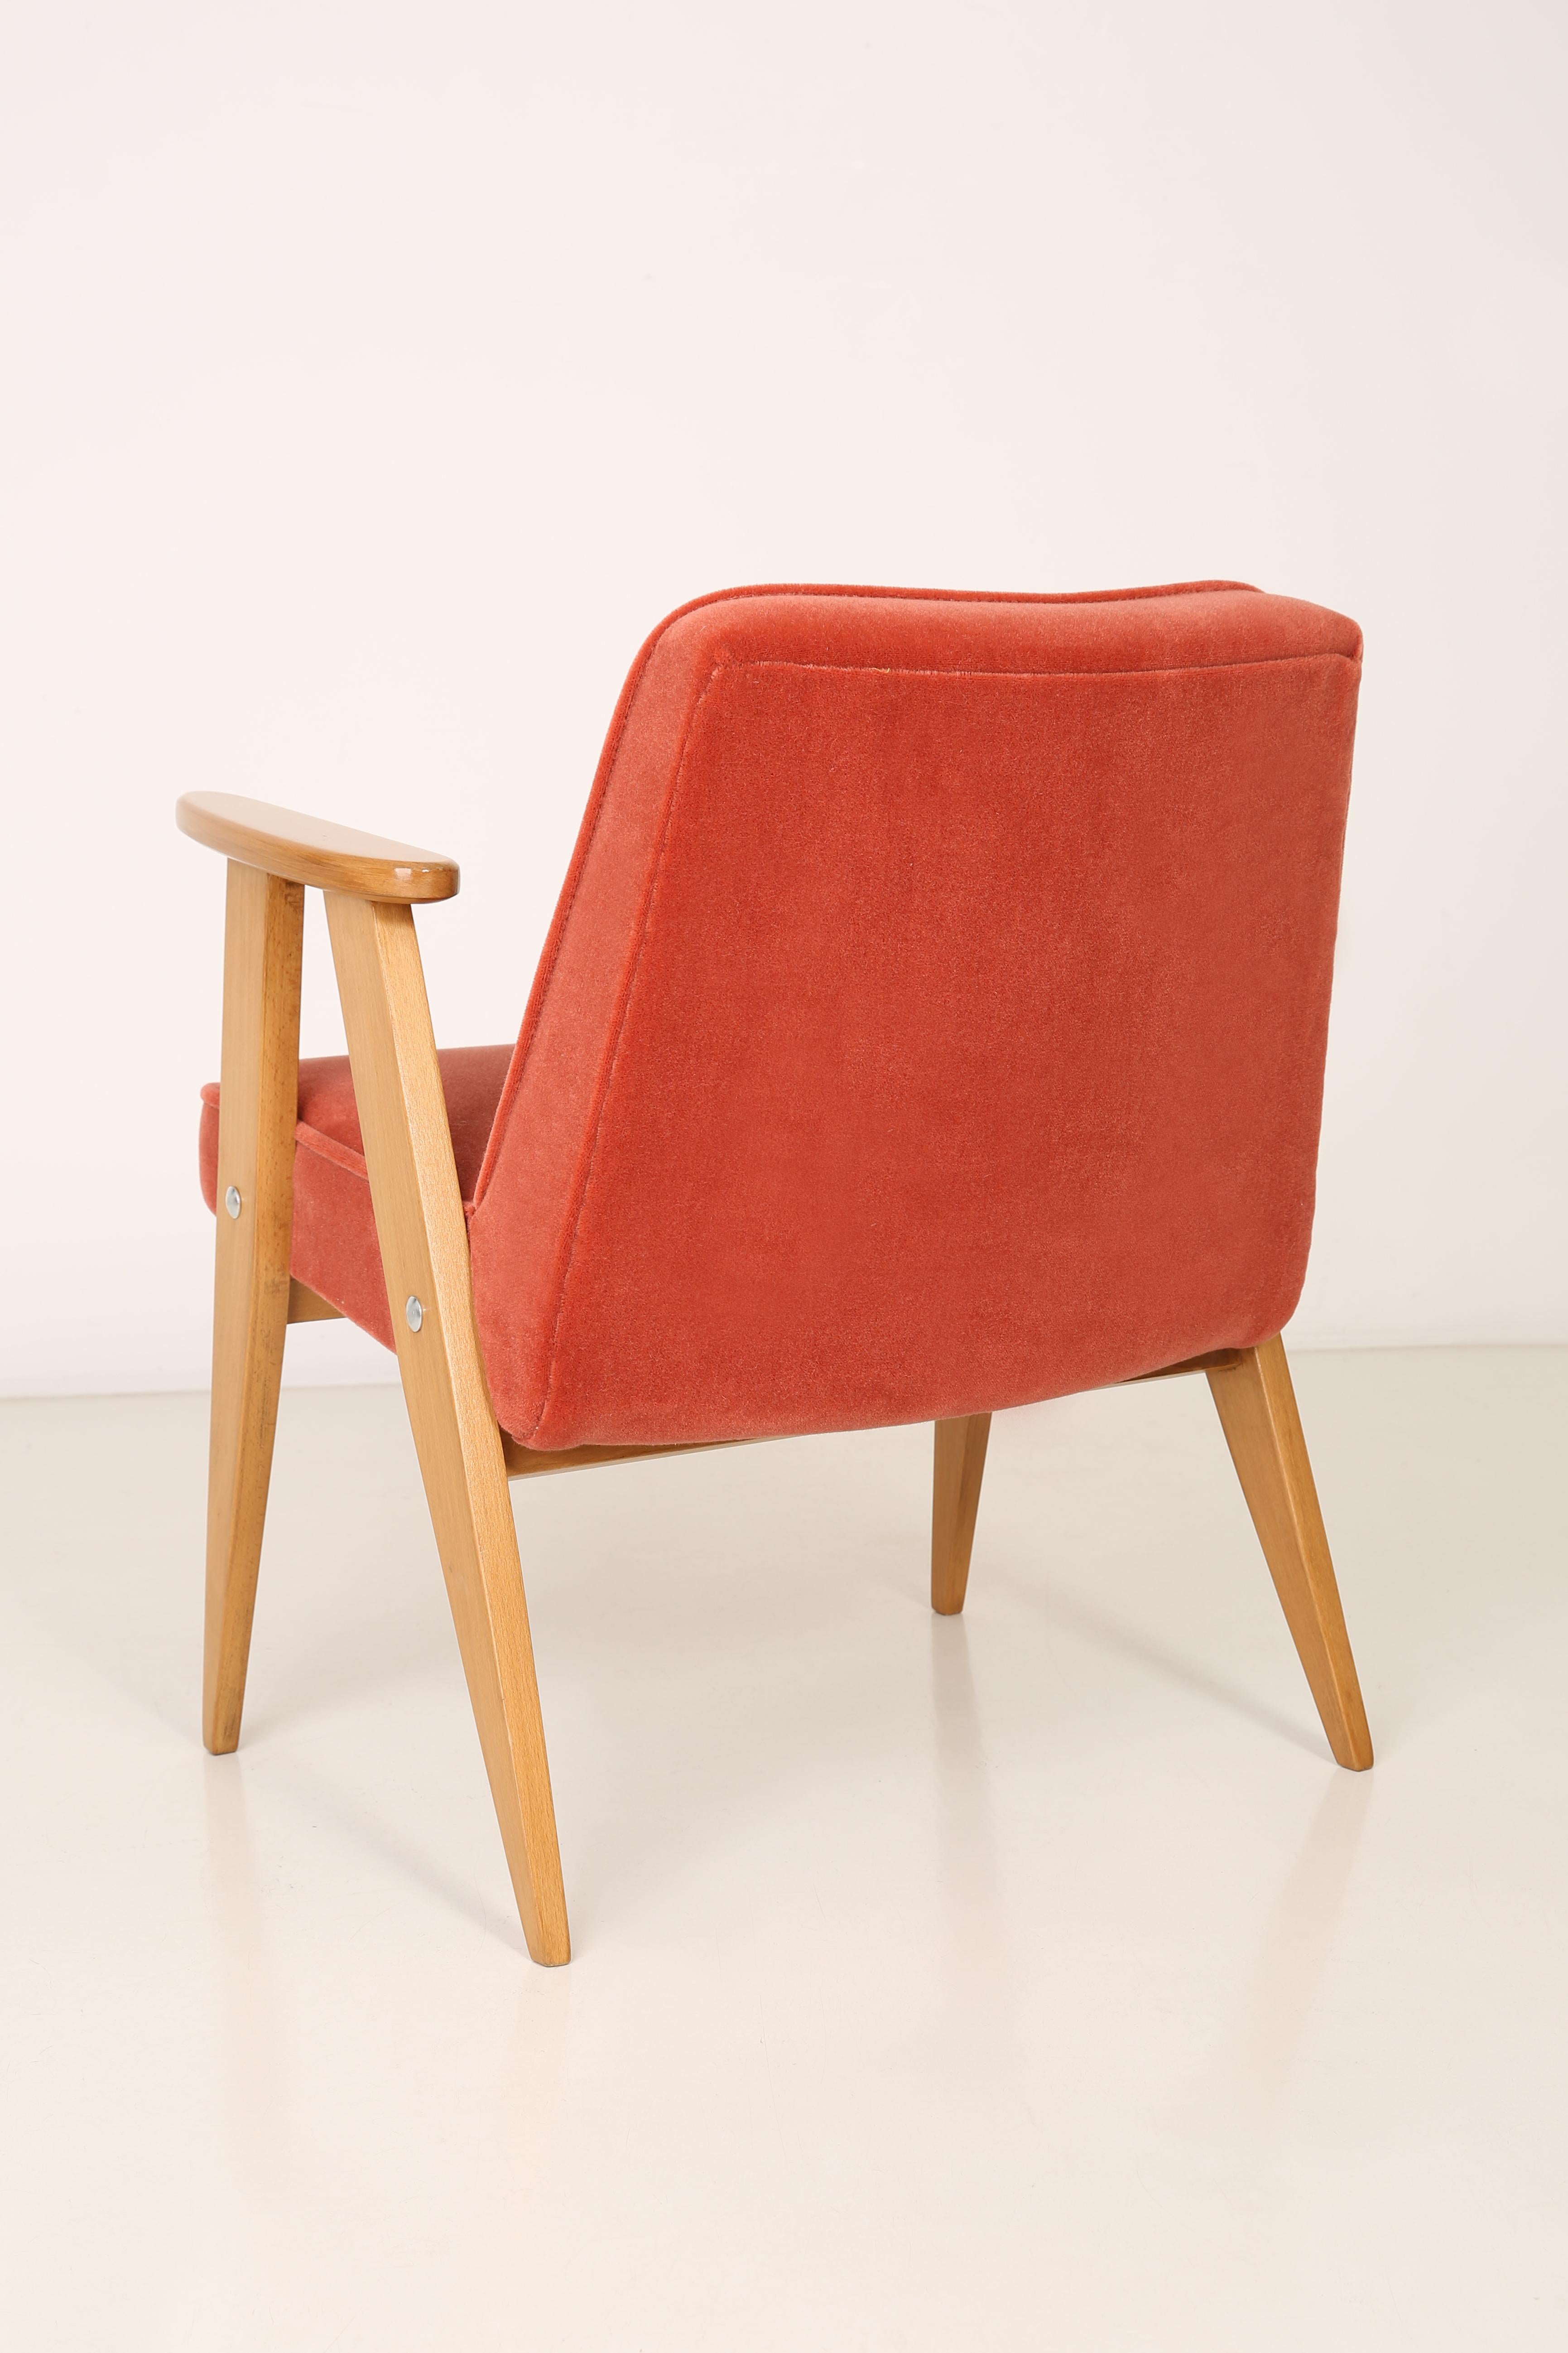 20th Century Mid-Century Modern 366 Armchair, Jozef Chierowski, 1960s For Sale